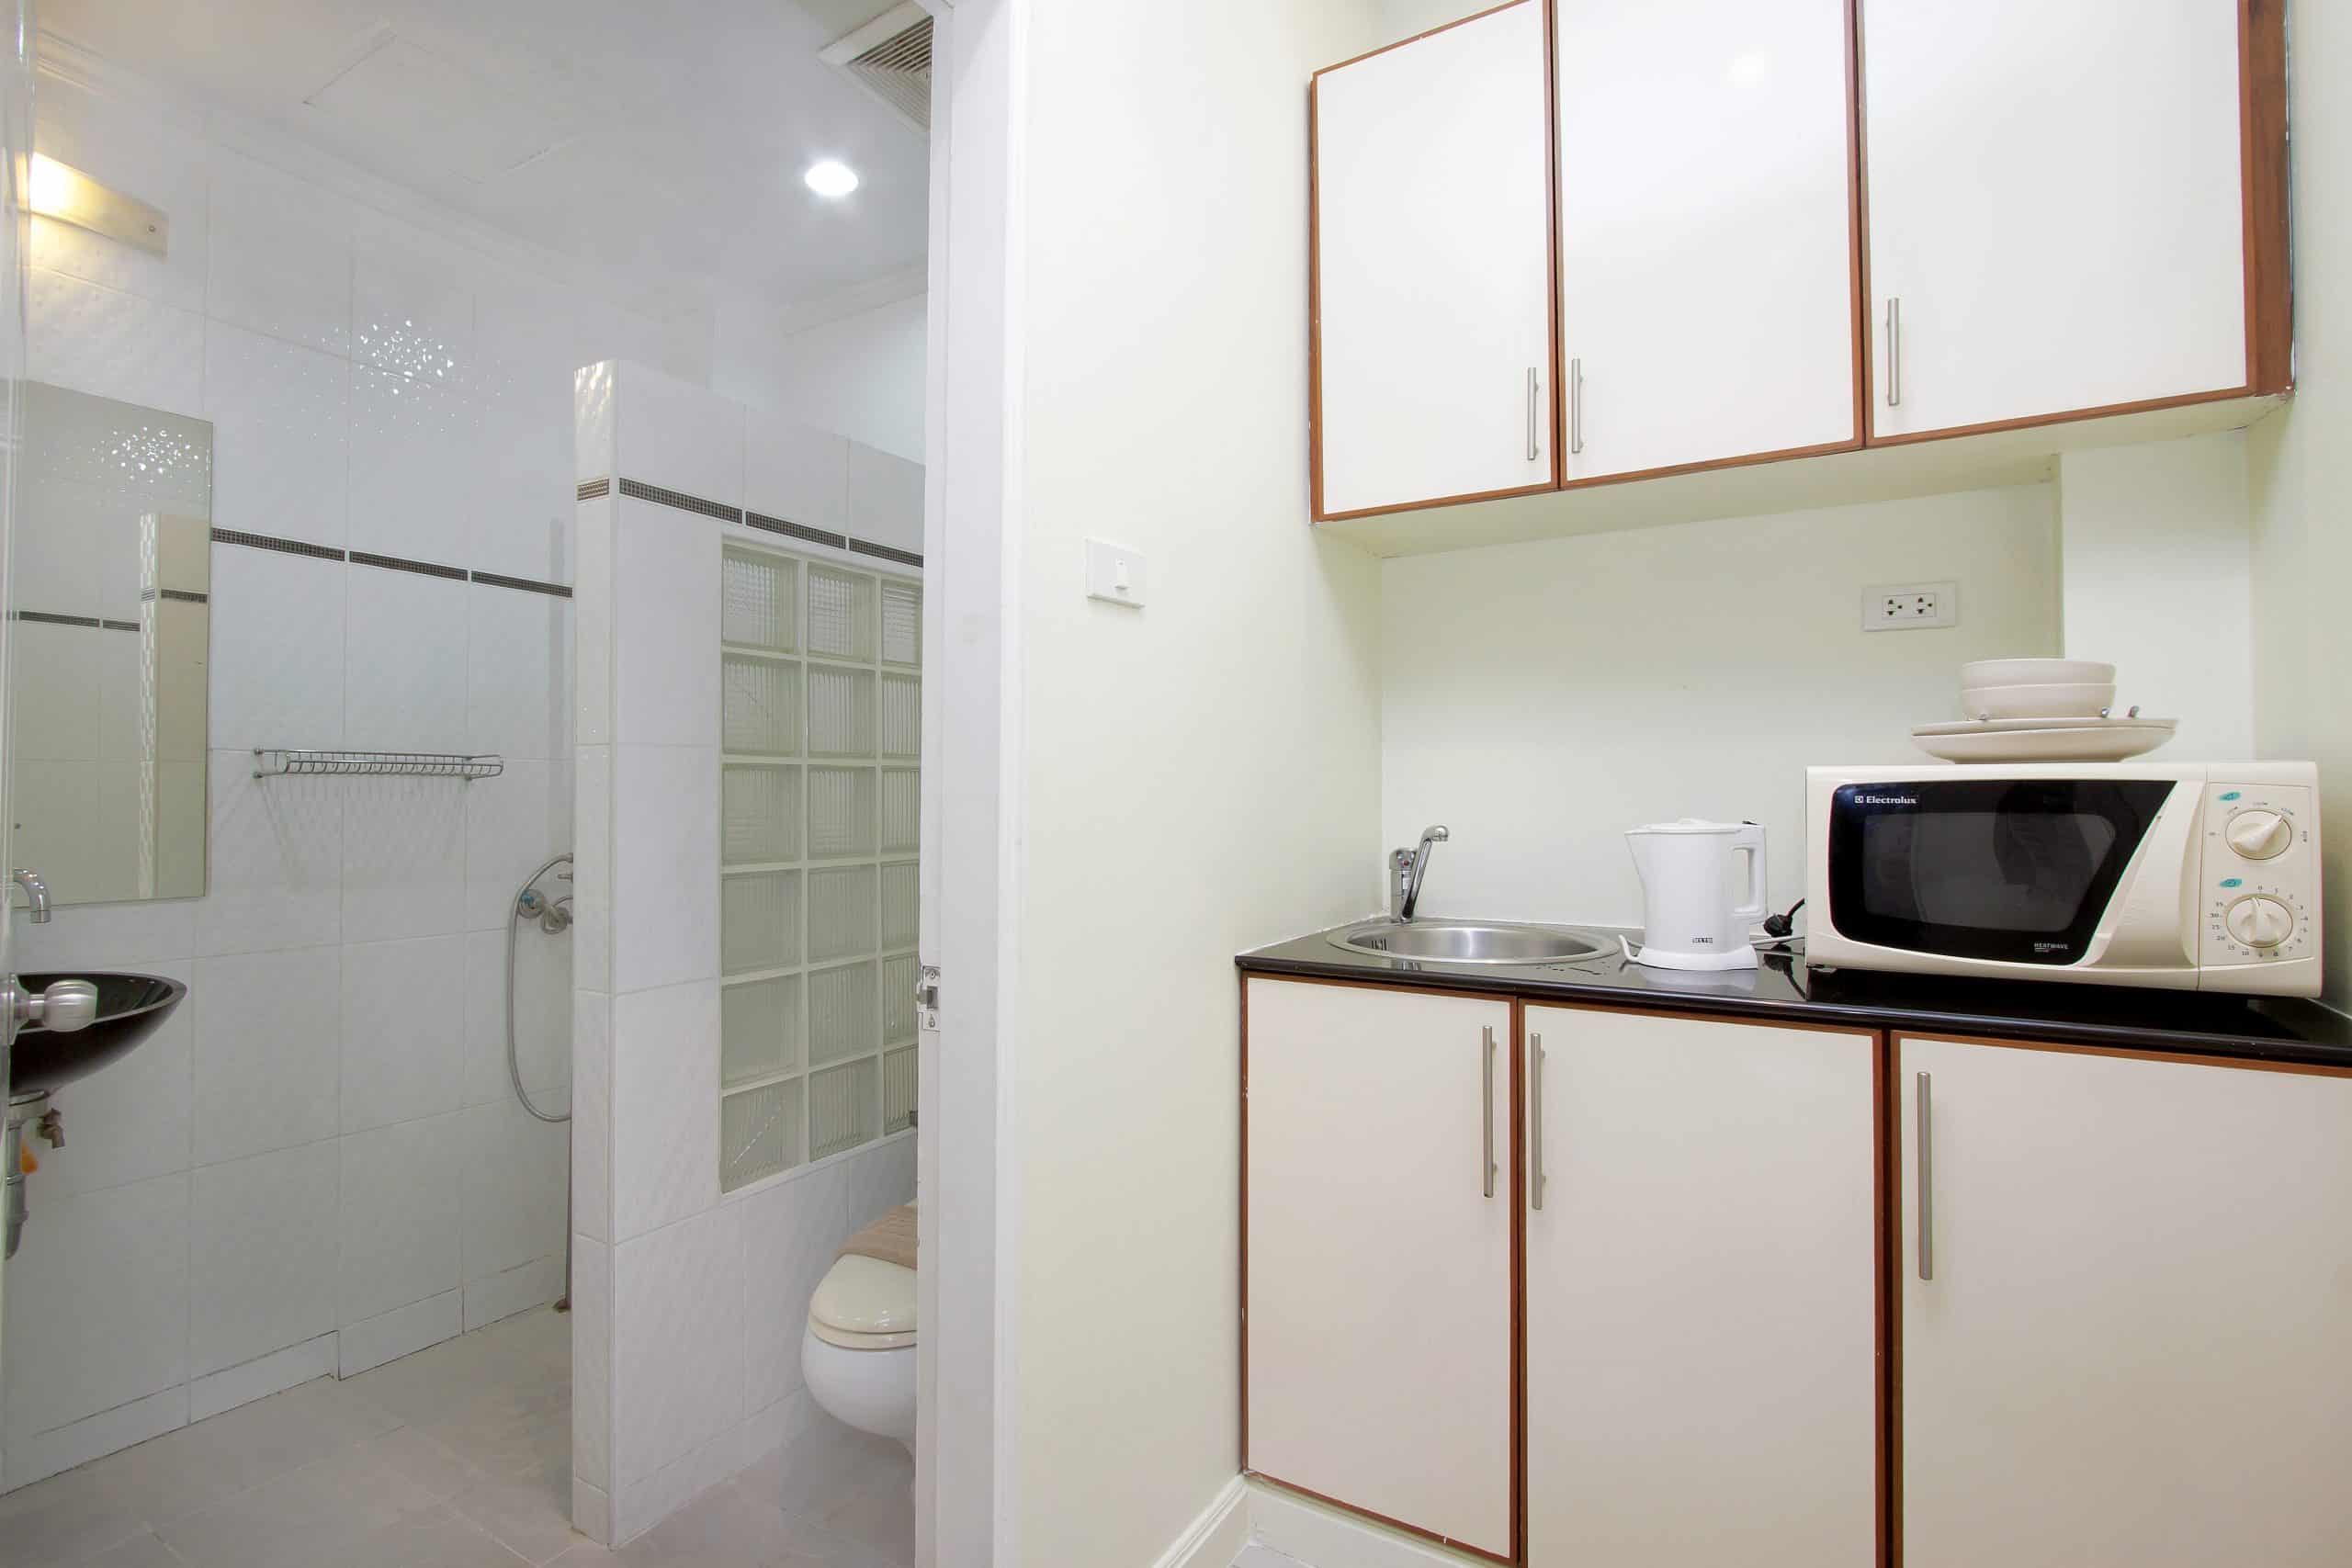 Enjoy your holiday to the fullest in this stylish and compact small studio apartment in Pattaya, complete with a cozy bed, functional kitchenette, private shower, air conditioning, and Wi-Fi.